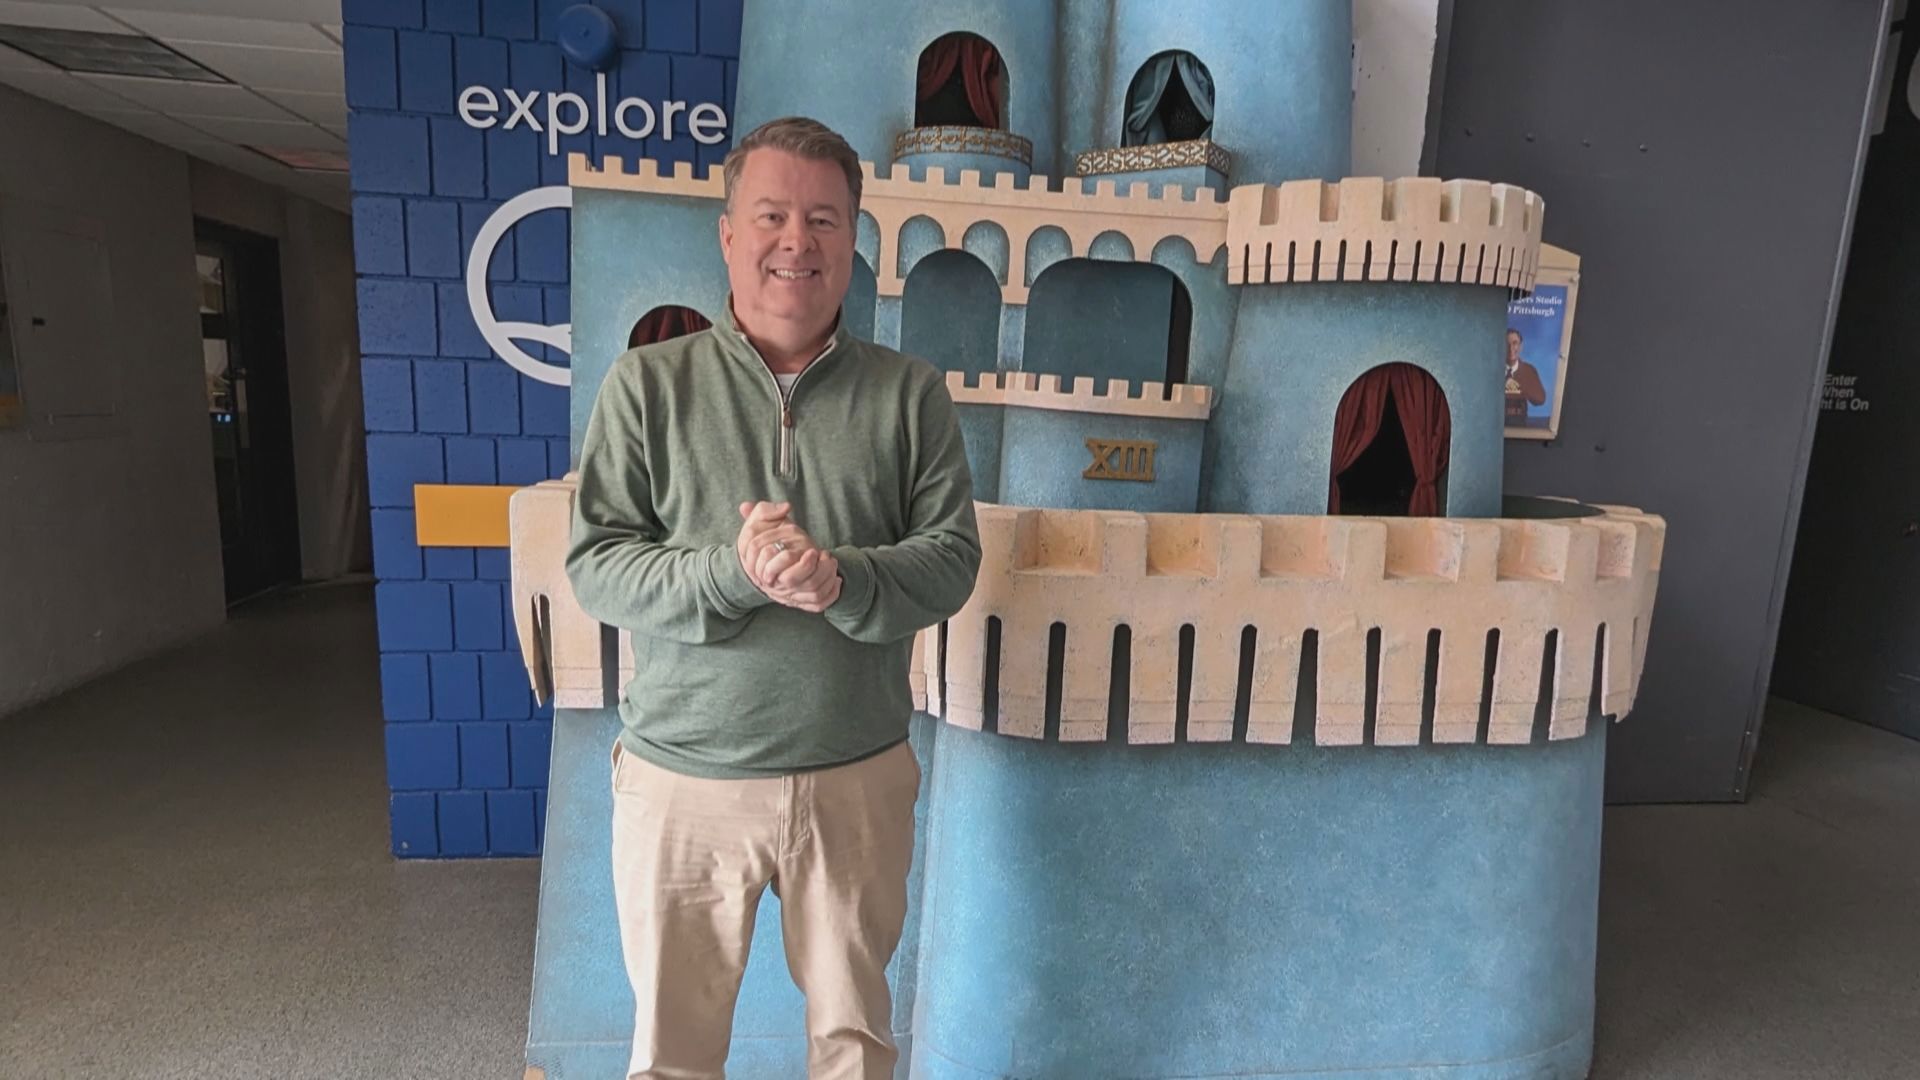 Eric Chilton visits the studio where Mr. Rogers was produced, bringing back childhood memories.